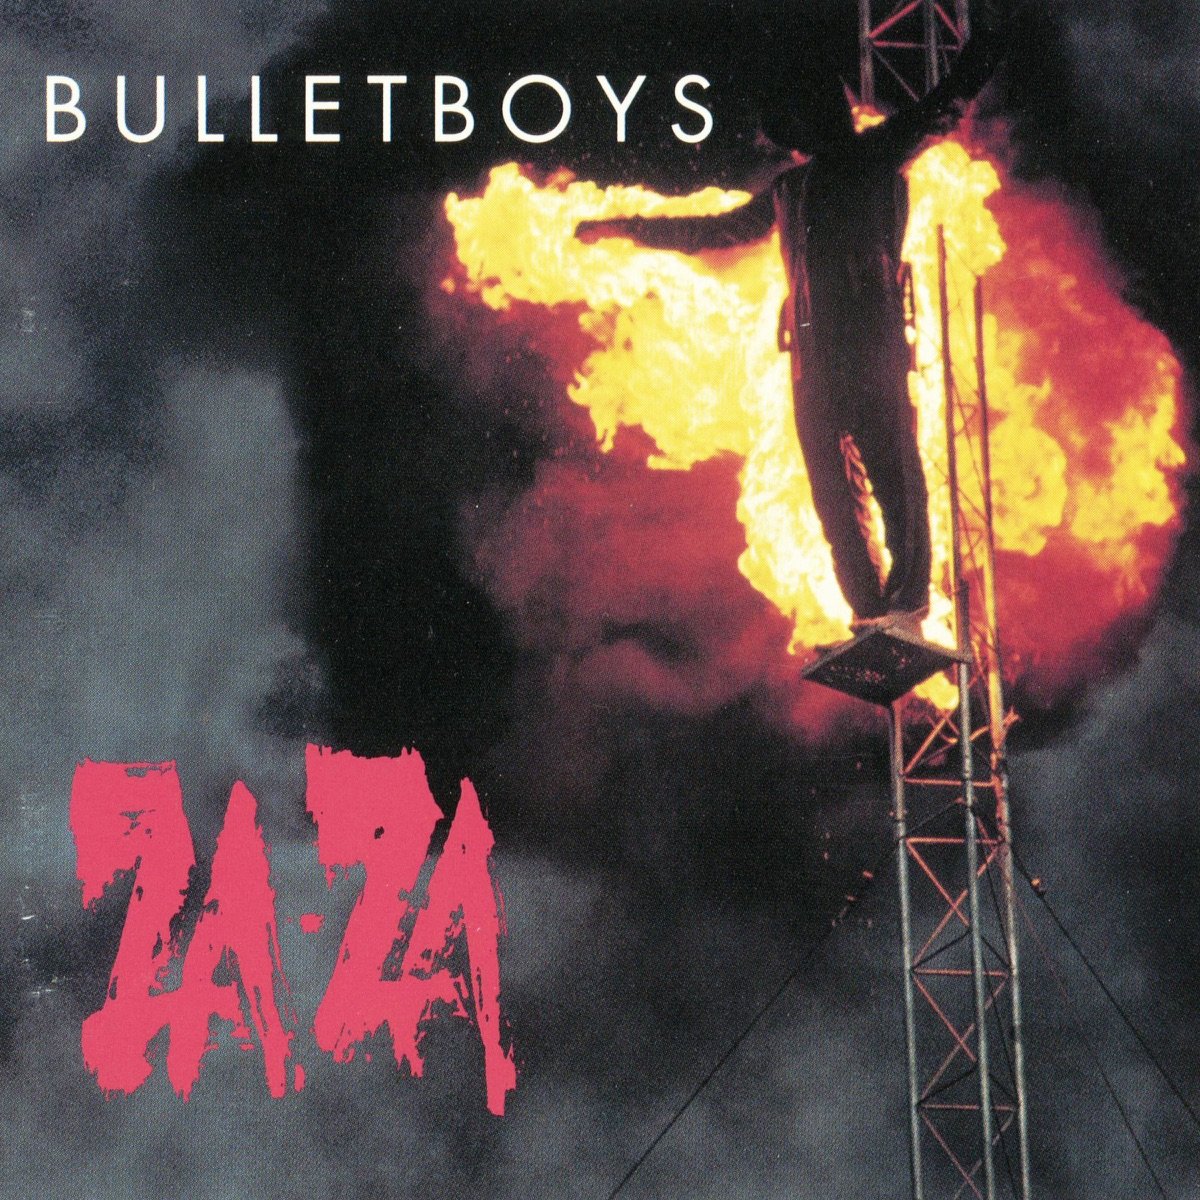 Bulletboys - Za-Za (1993)
Knee deep in grunge and these glam boys release another album. It's a bit all over the place, but they come in roaring with When Pigs Fly. I really like this album, but if it was more consistent in the vein of Pigs, it would be stellar hard rock.